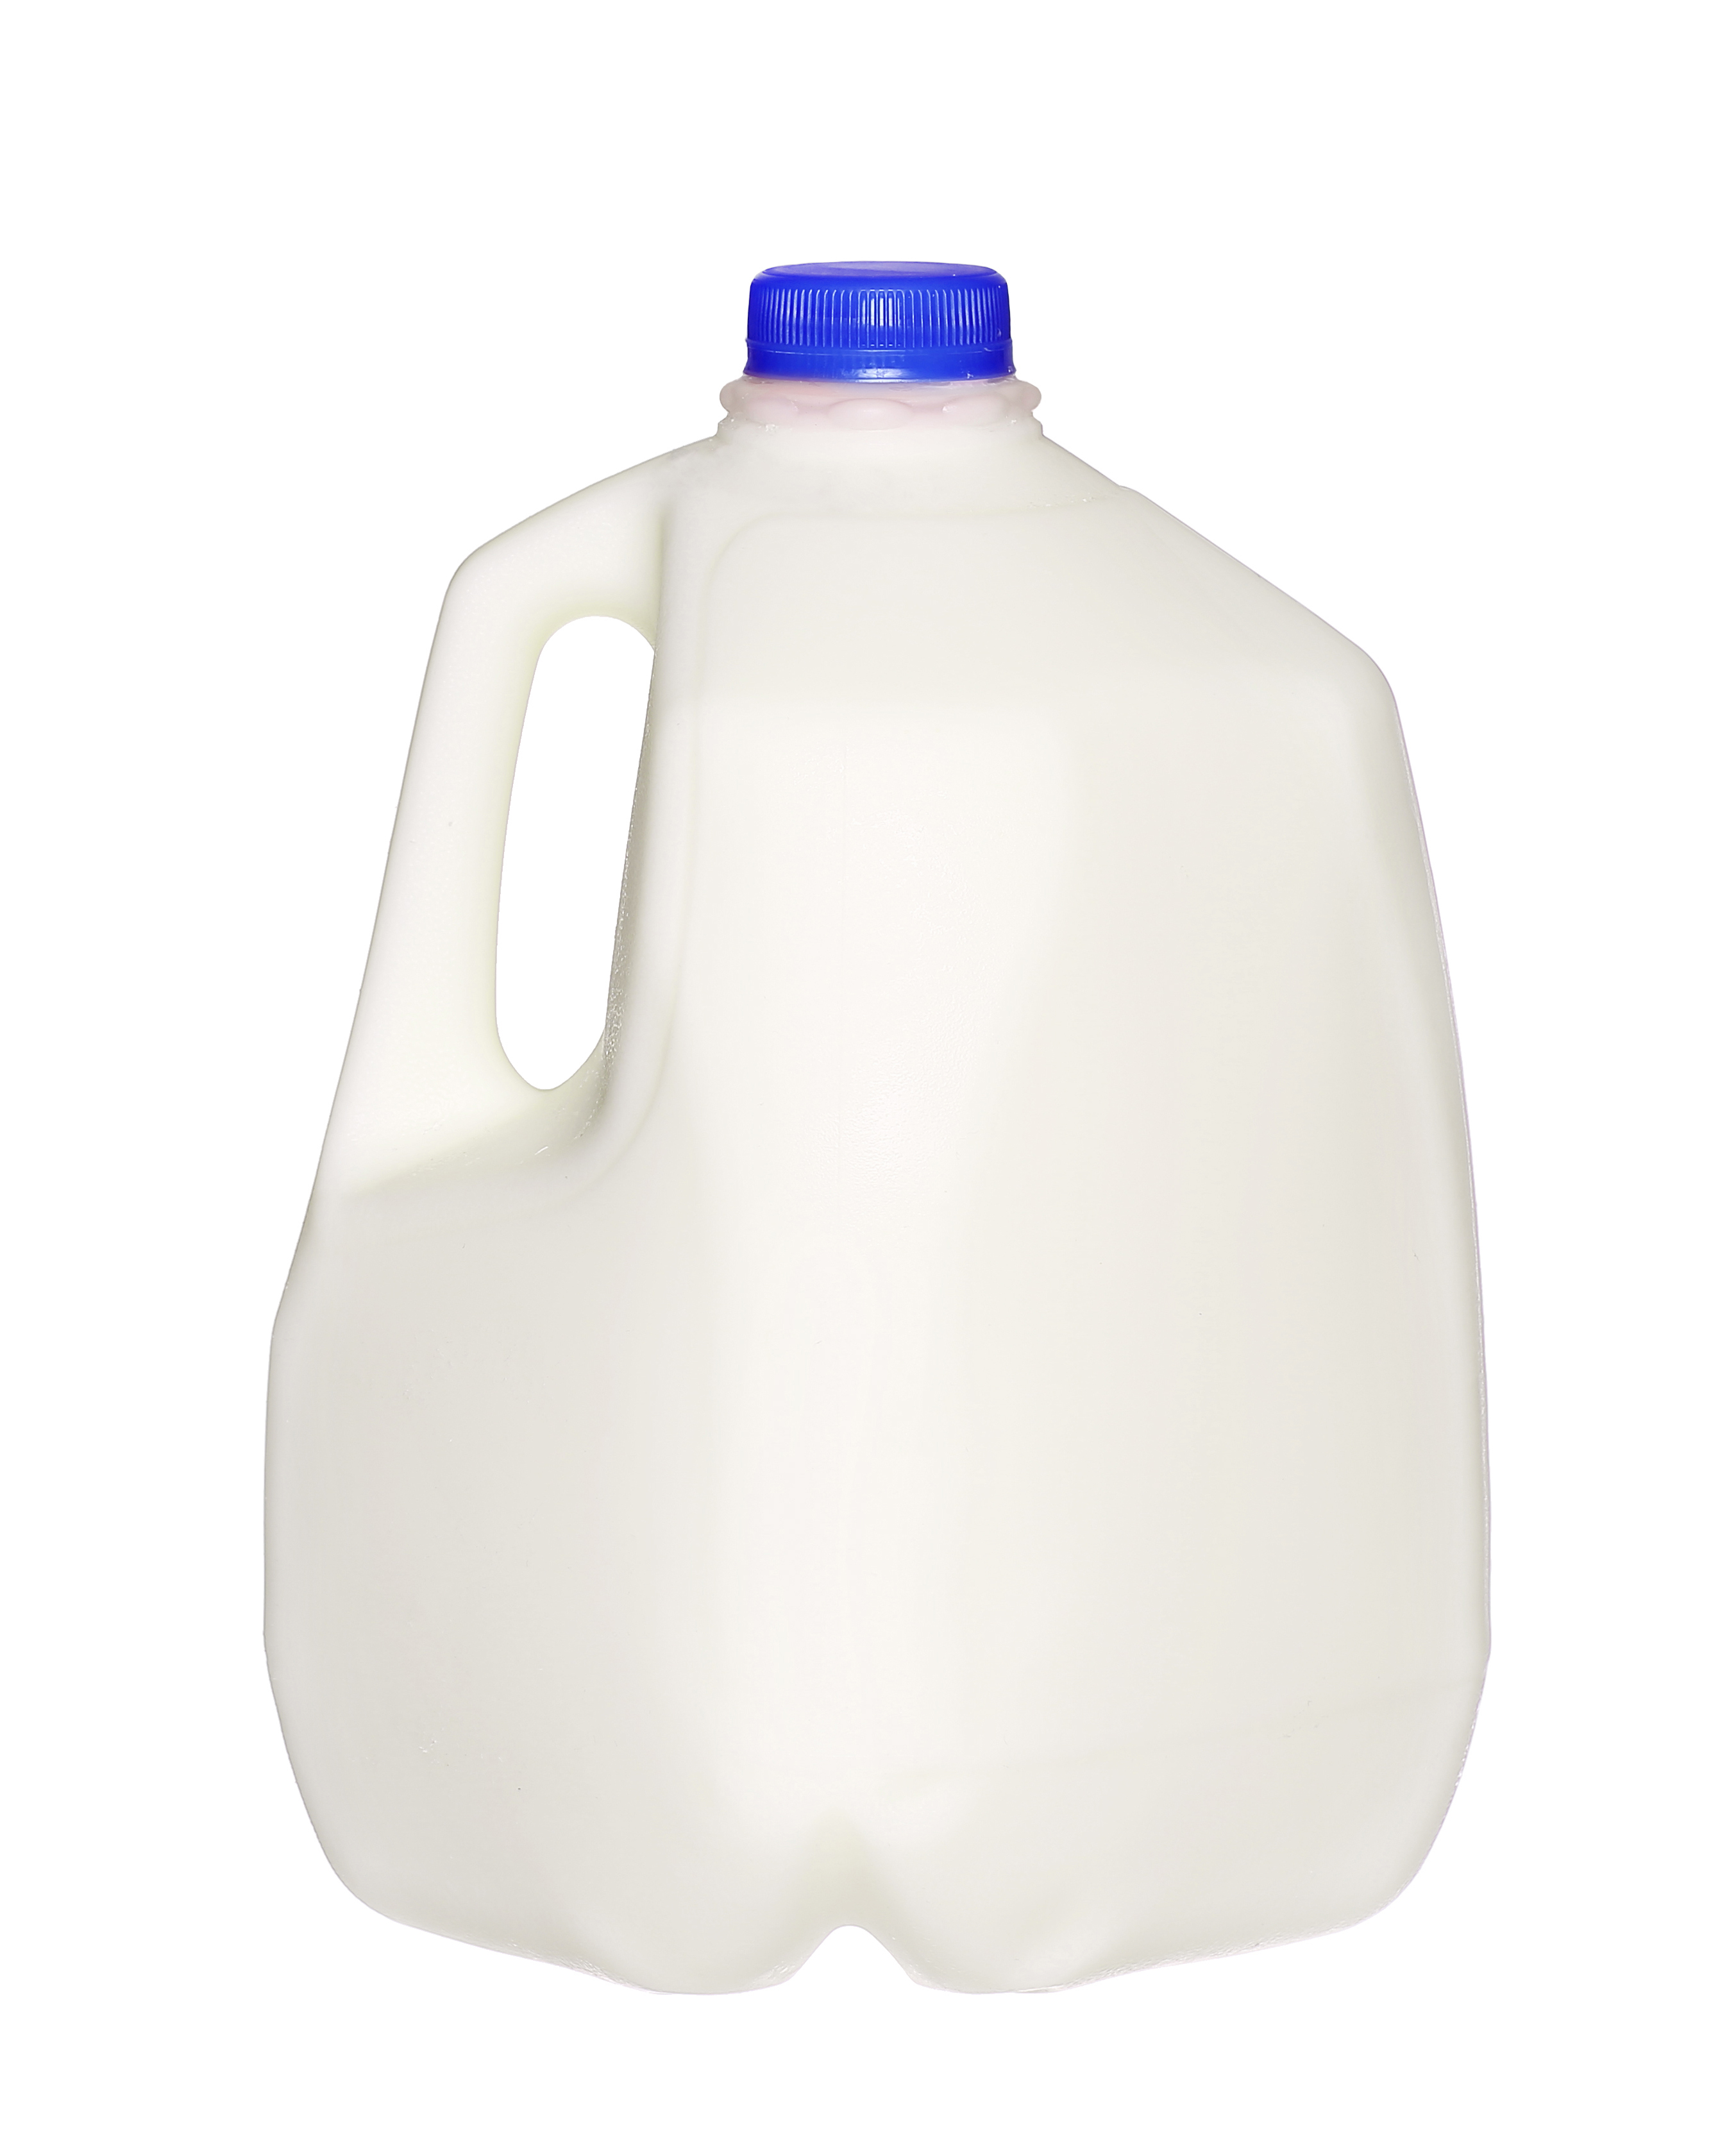 gallon Milk Bottle with blue Cap Isolated on White